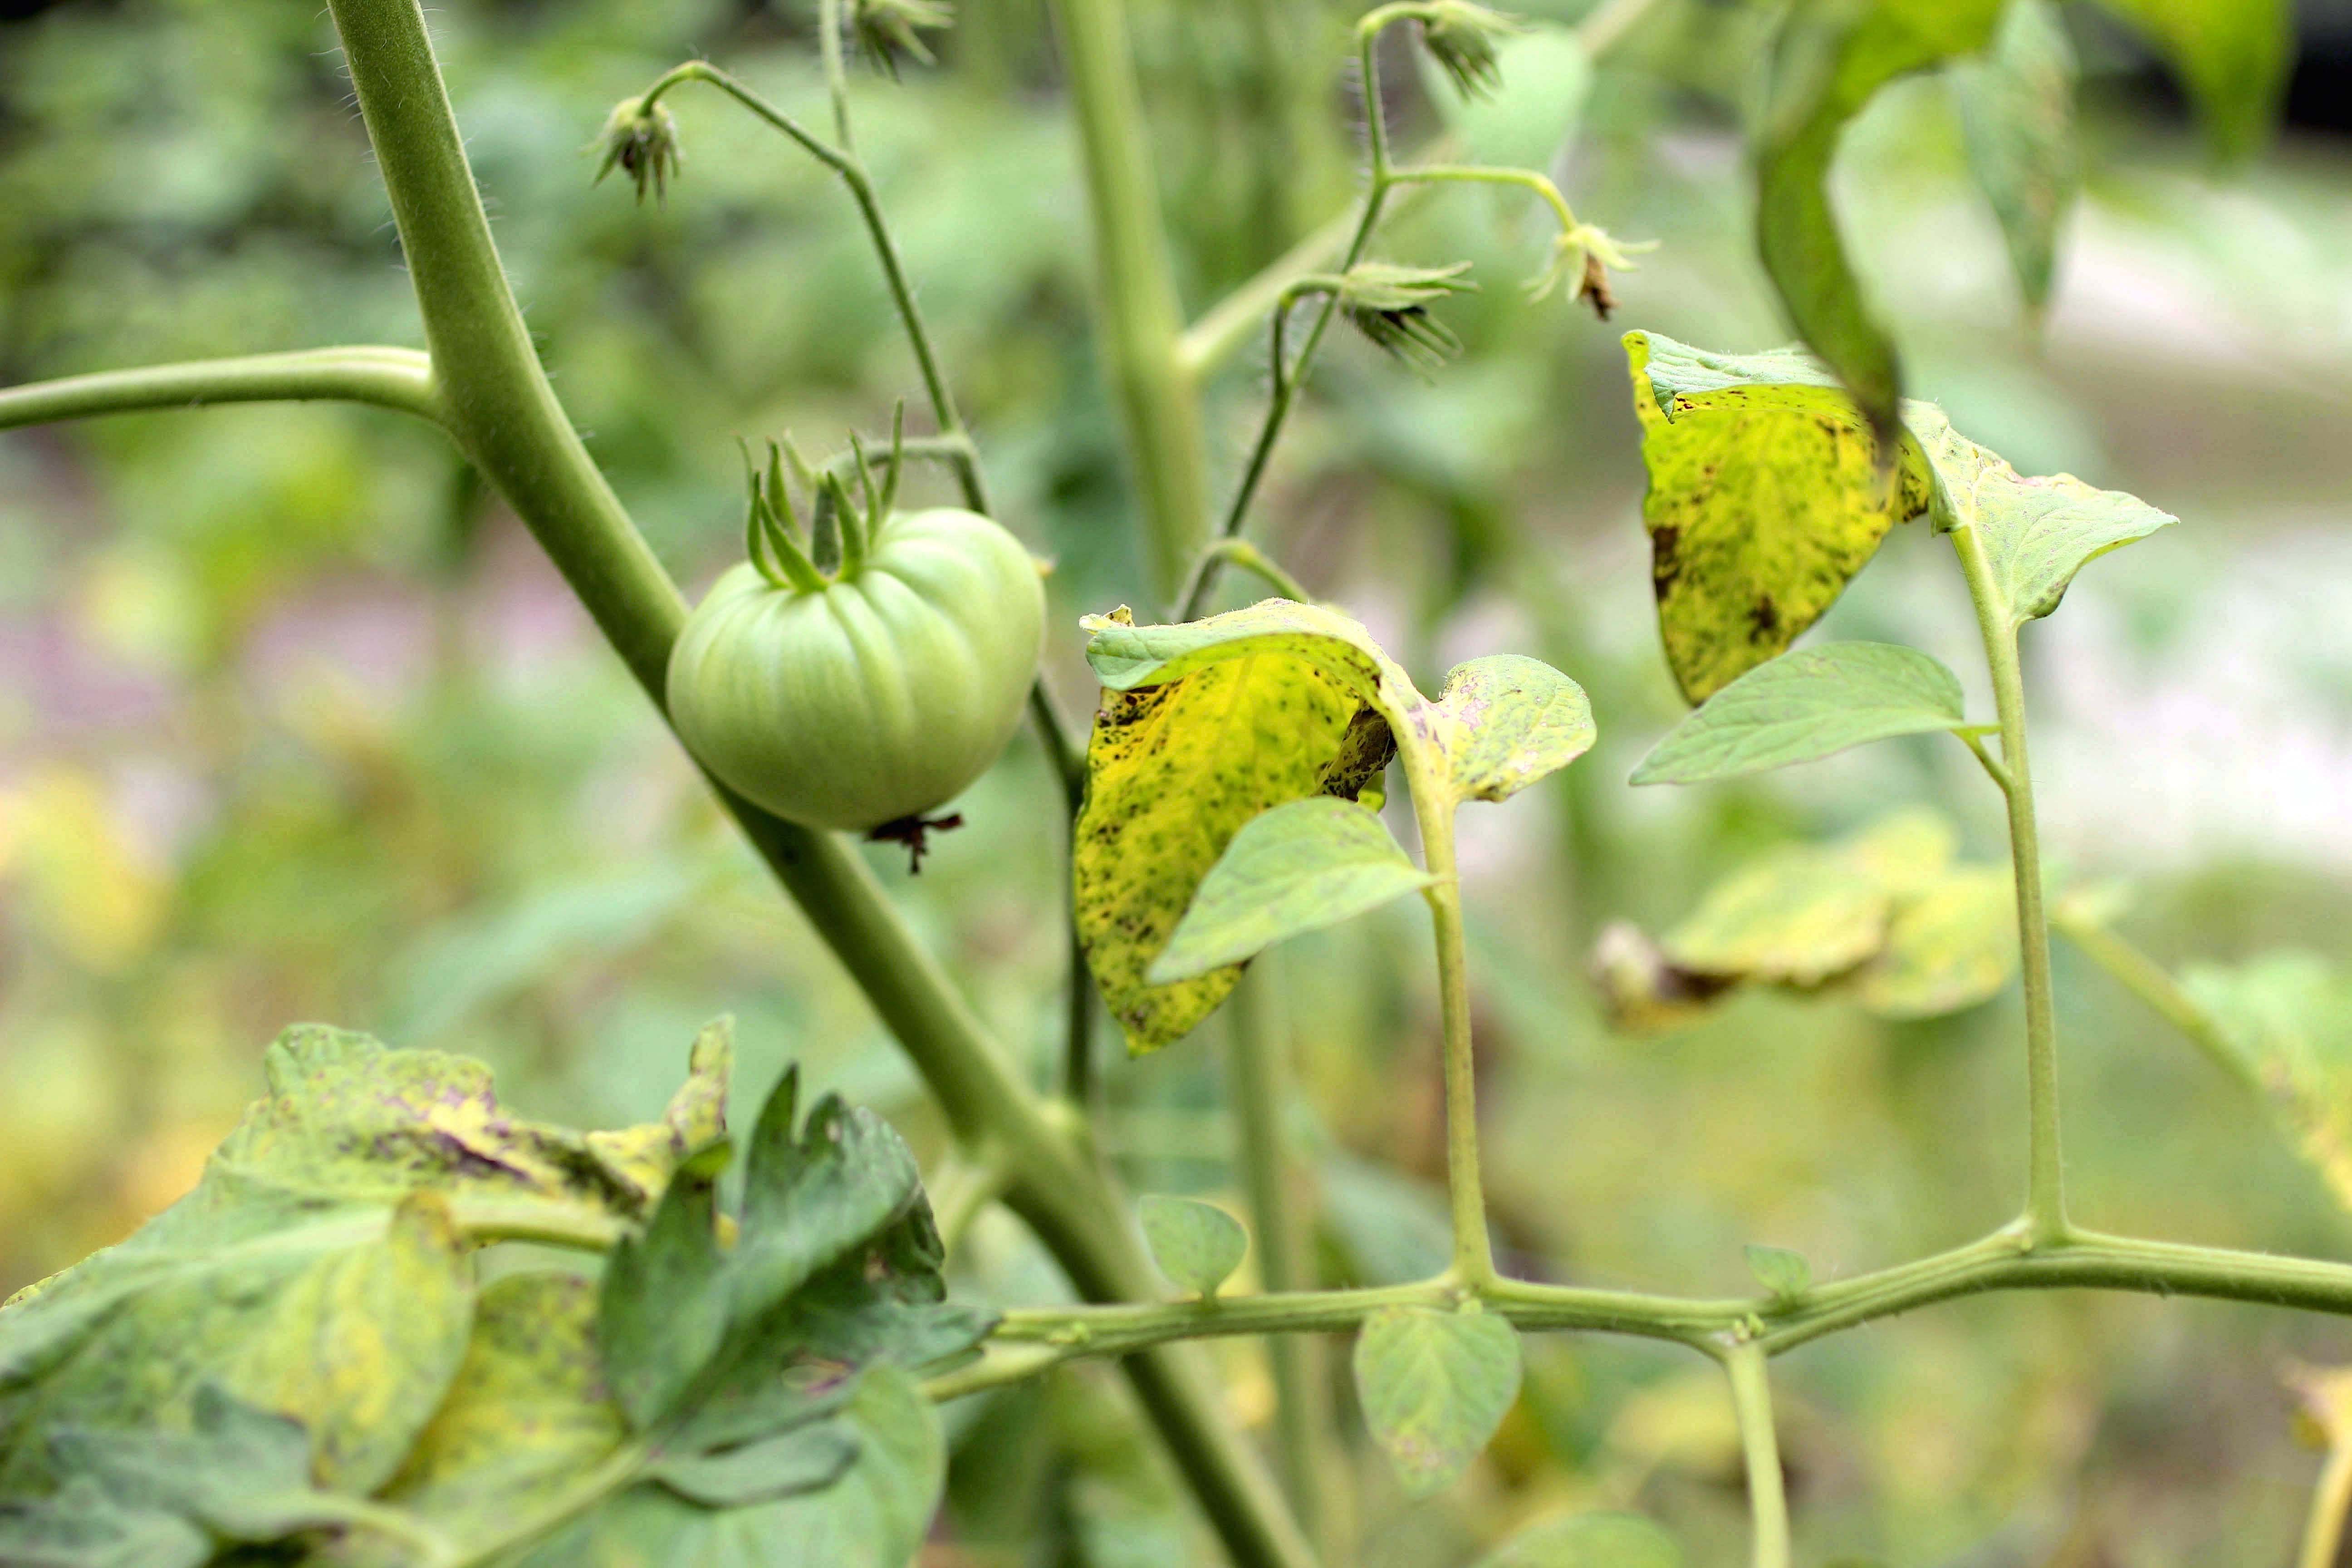 treating late blight in tomatoes